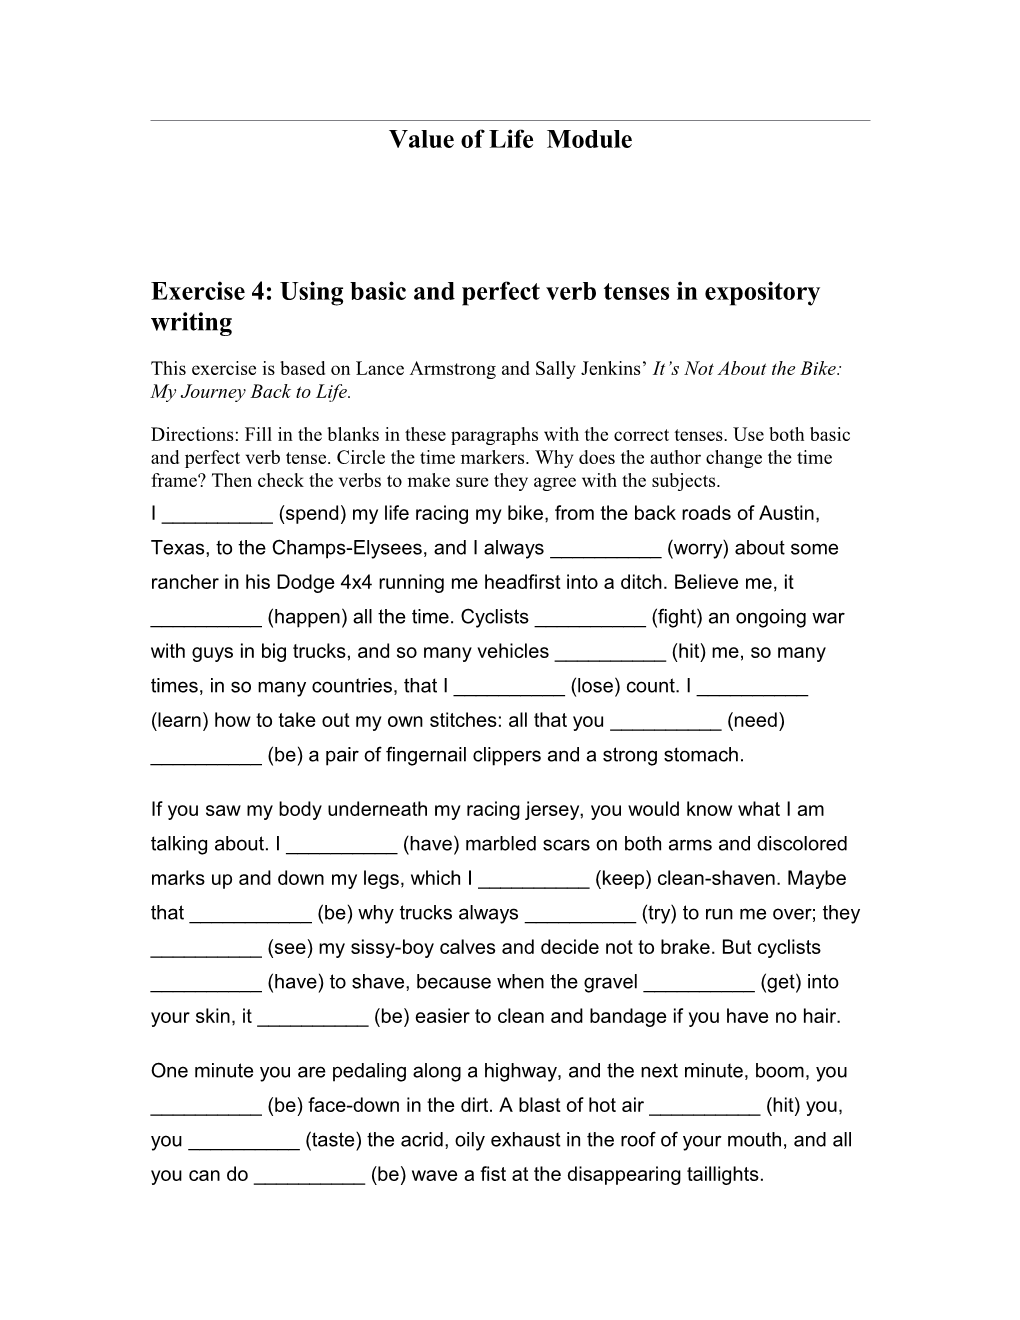 Exercise 4: Using Basic and Perfect Verb Tenses in Expository Writing